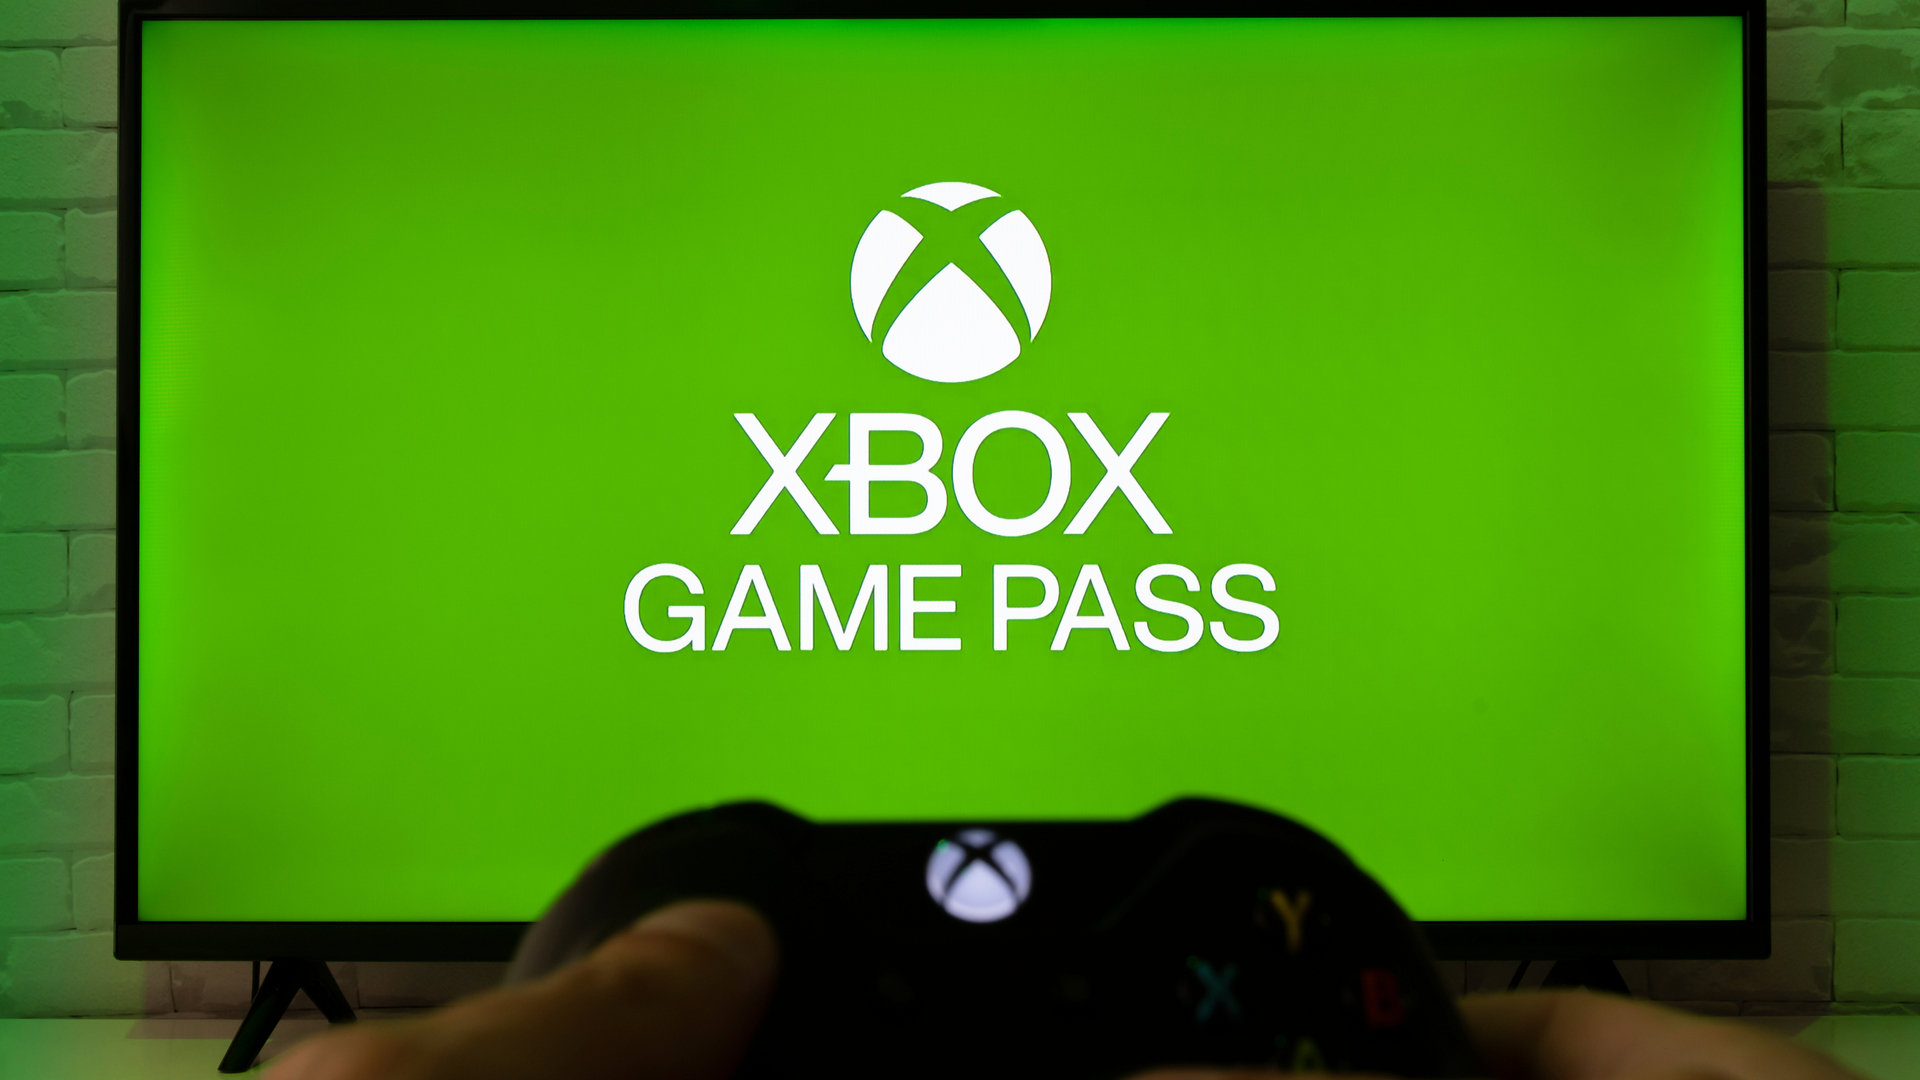 Xbox Game Pass splash screen with someone holding a controller